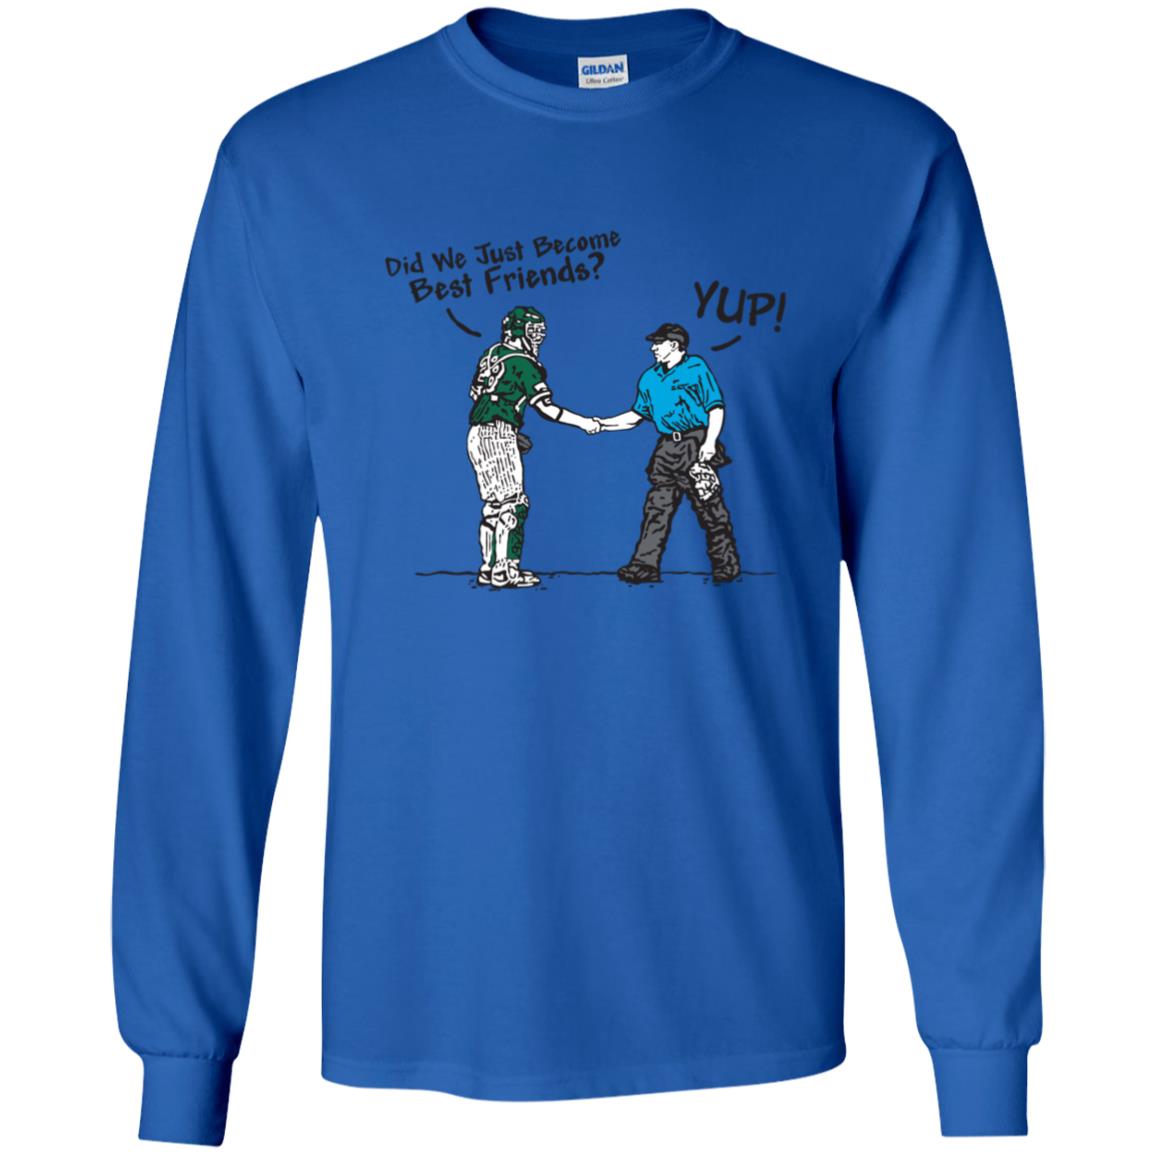 The Catching Guy Best Friends Youth Long Sleeve Tee blue